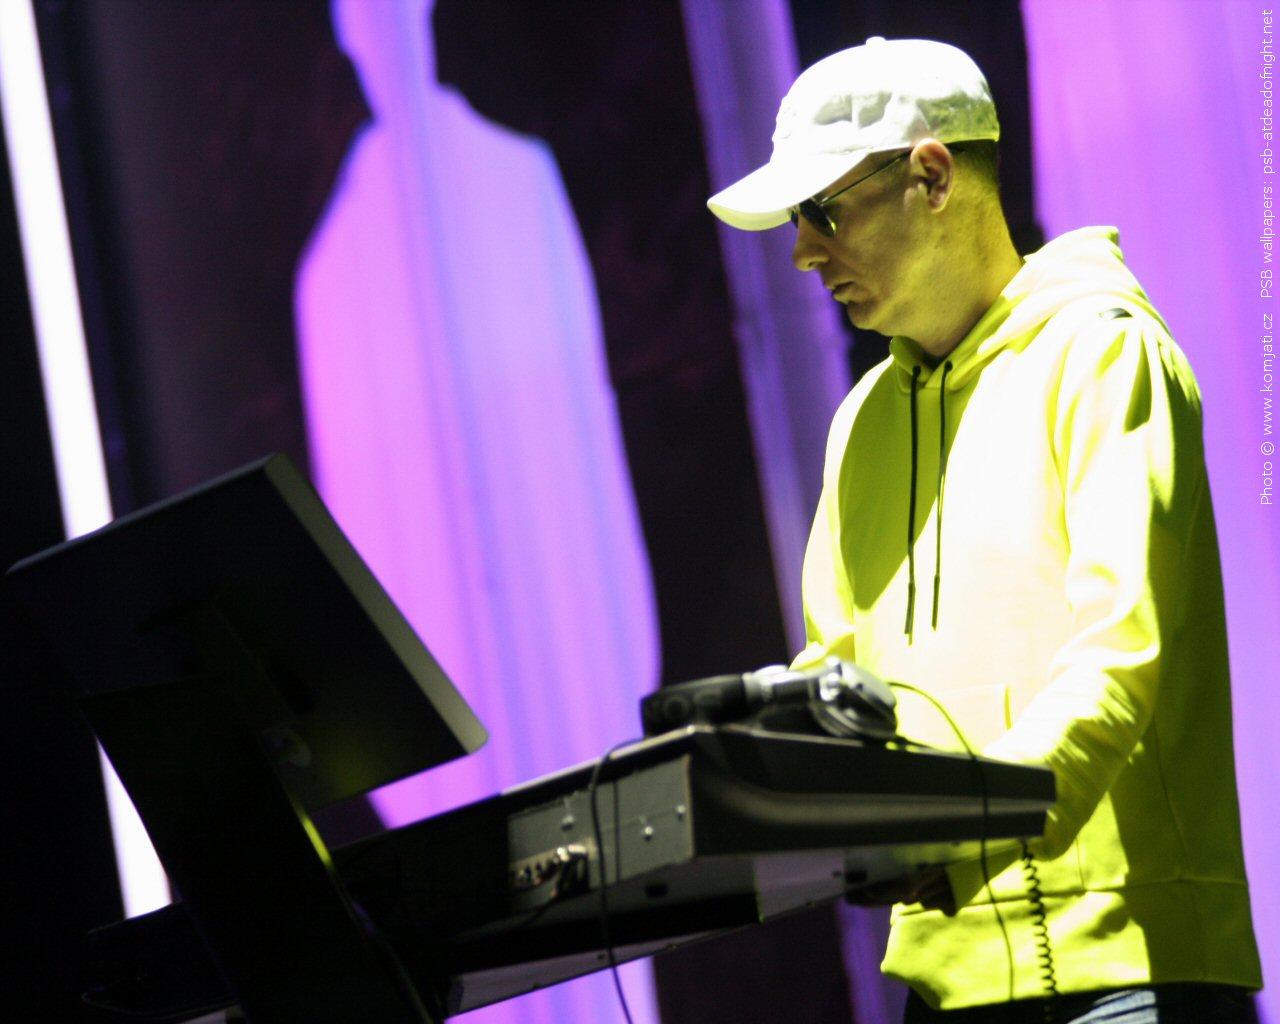 Pet Shop Boys at dead of night, picture